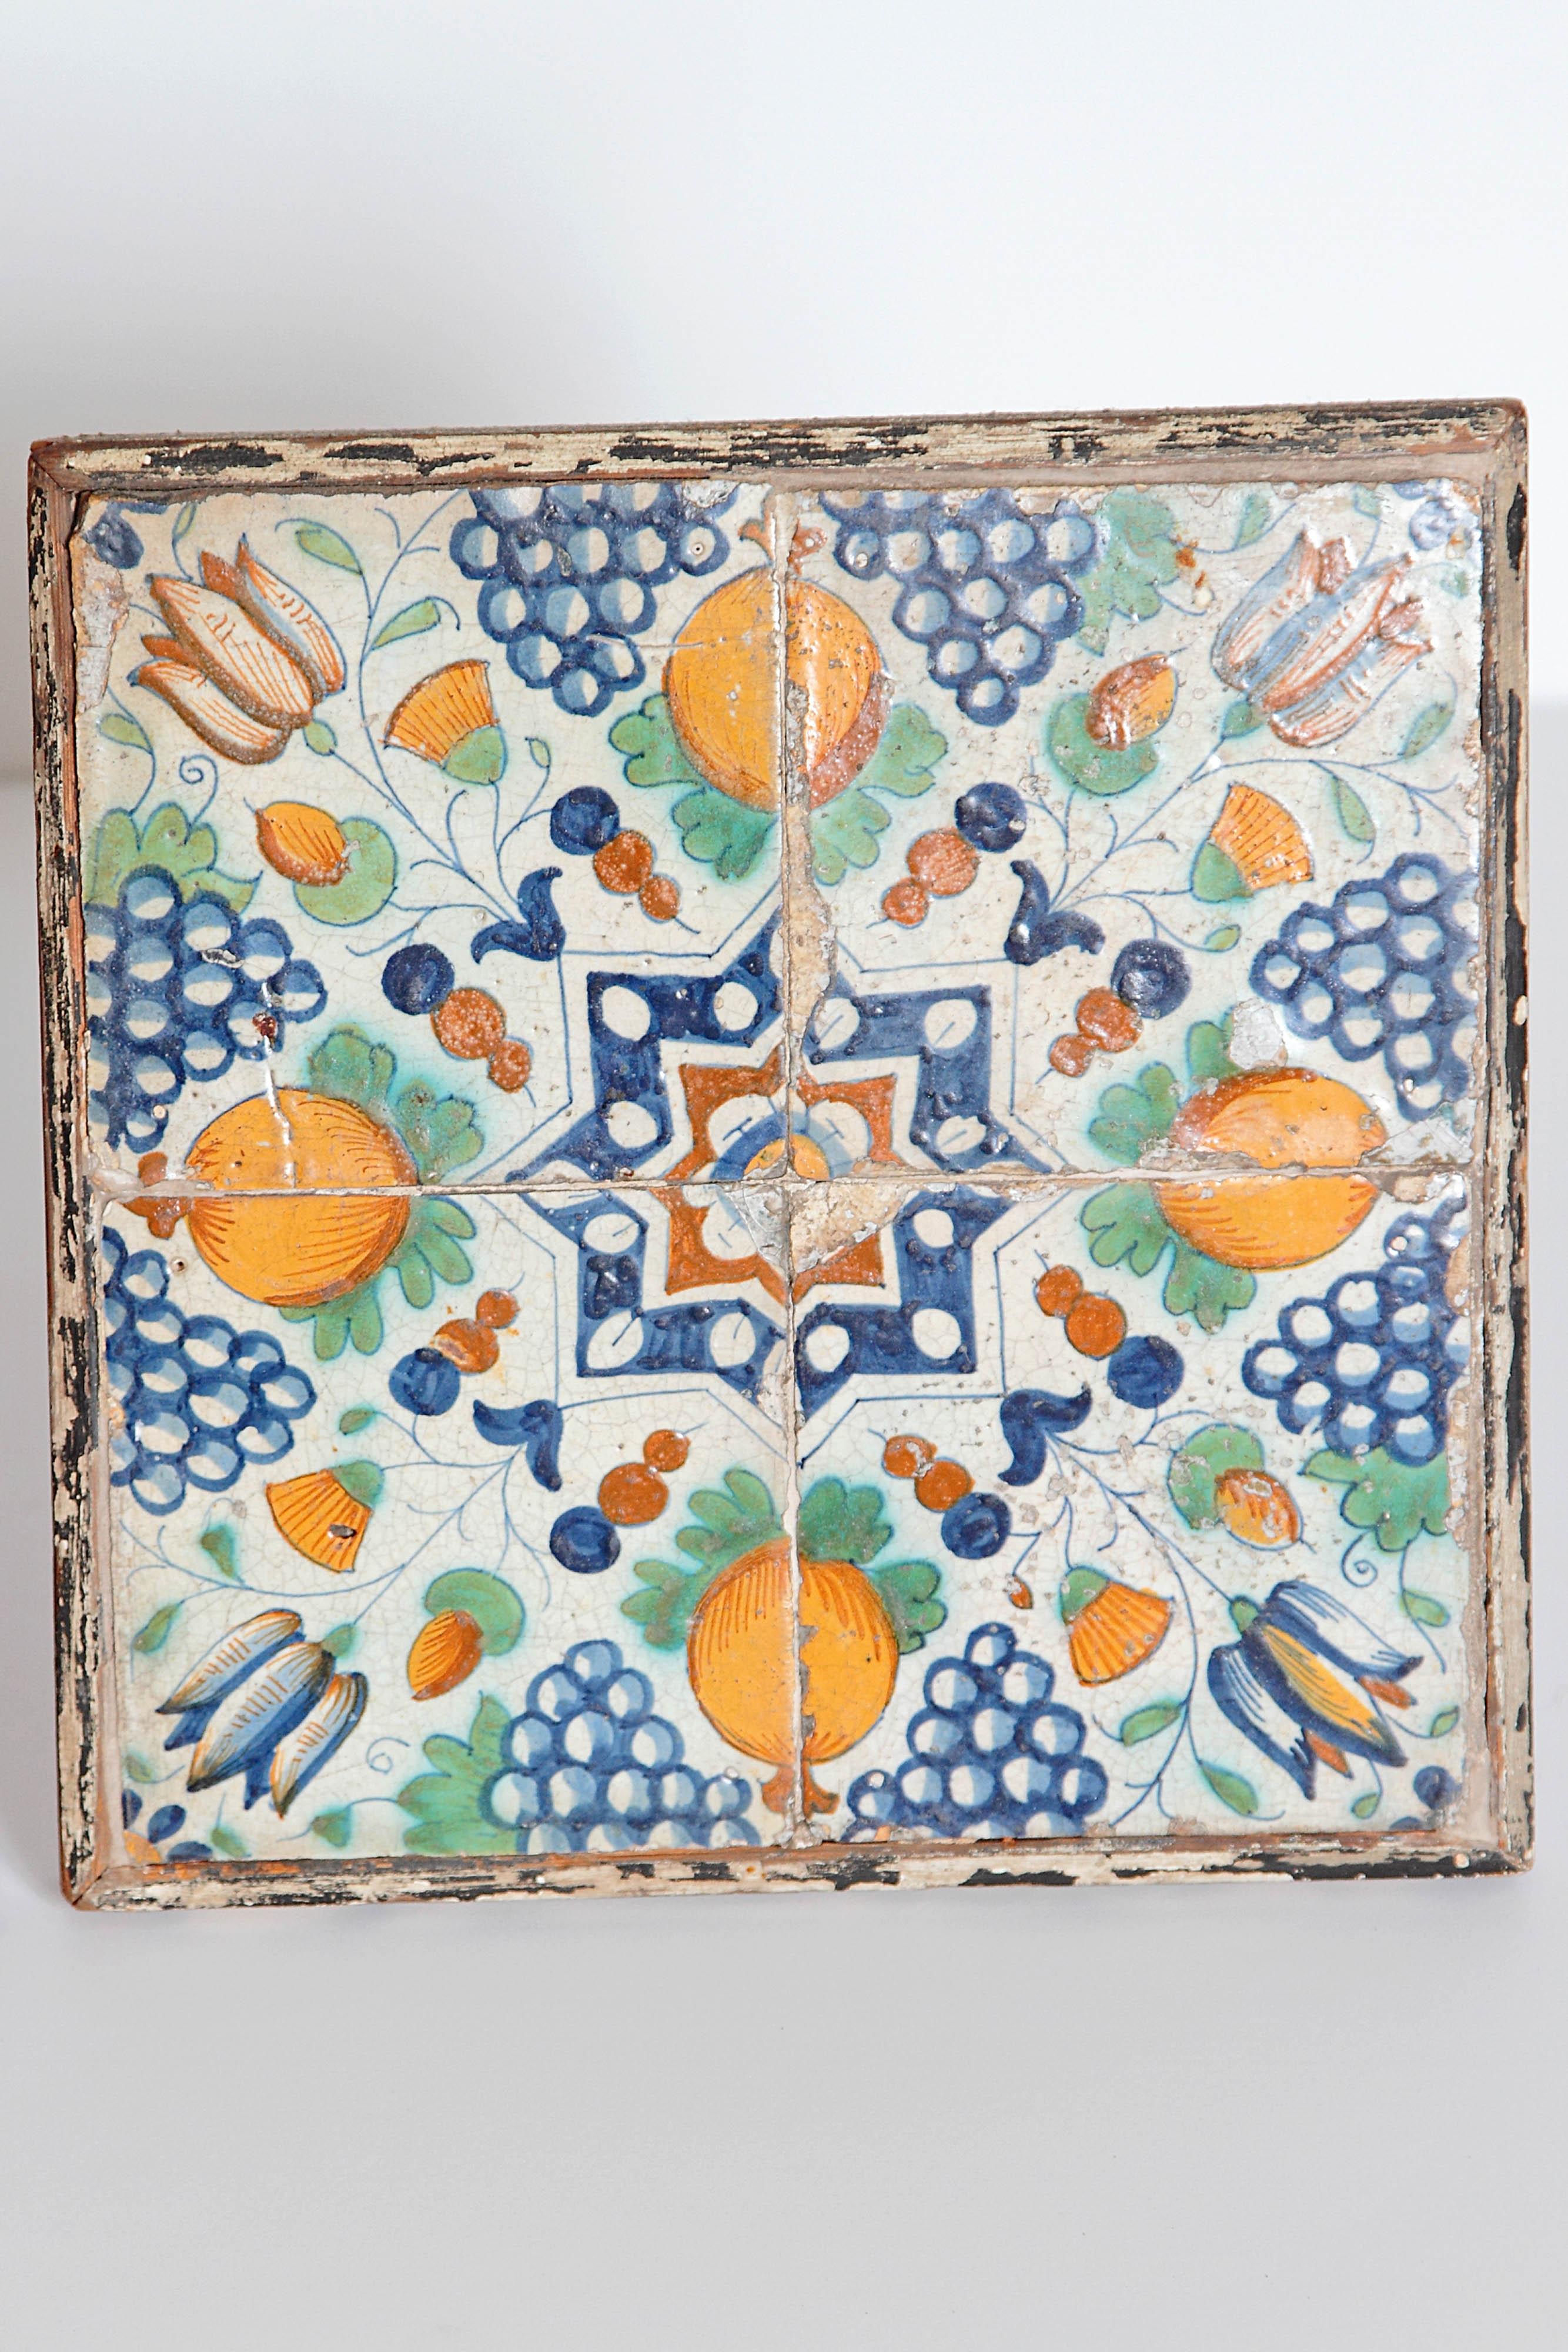 A pair of antique terra cotta Italian tiles. This set of tiles has a vibrant color scheme of orange, green and blue on a white background. Each consist of four tiles set in a weathered wooden frame. These tiles would be great either on the wall or